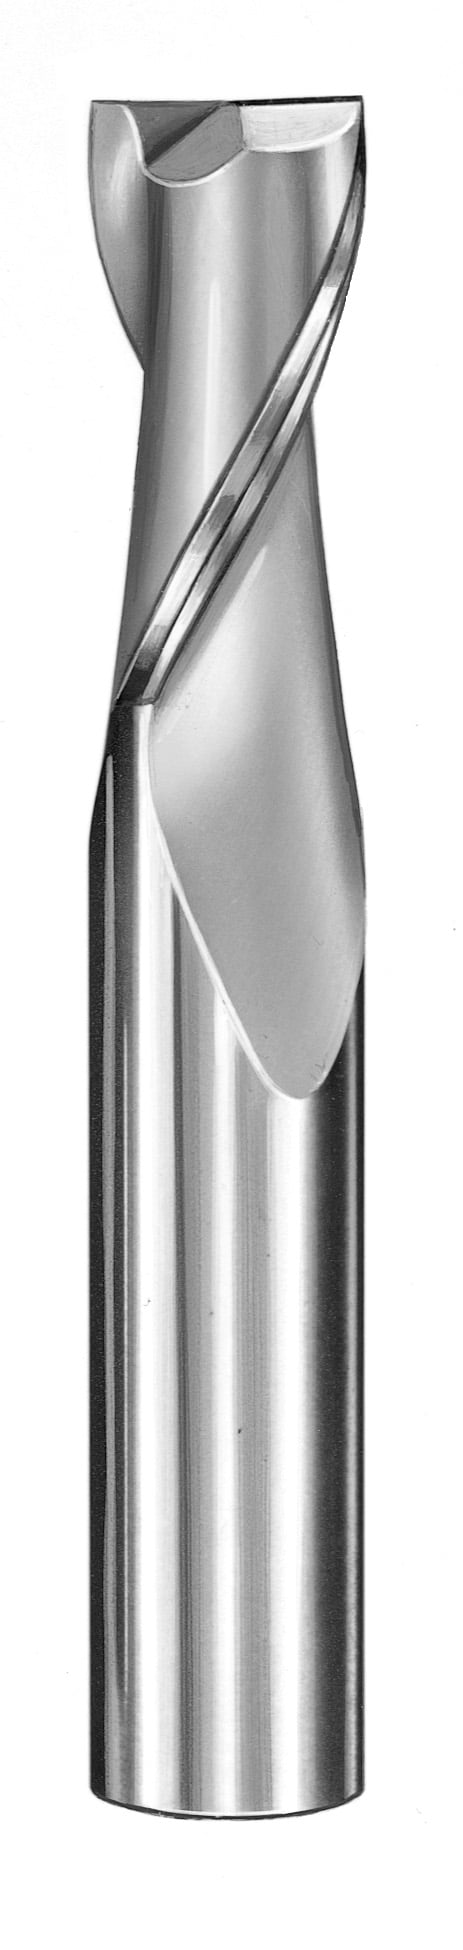 5/8" Dia, 2 Flute, Square End End Mill - 30367